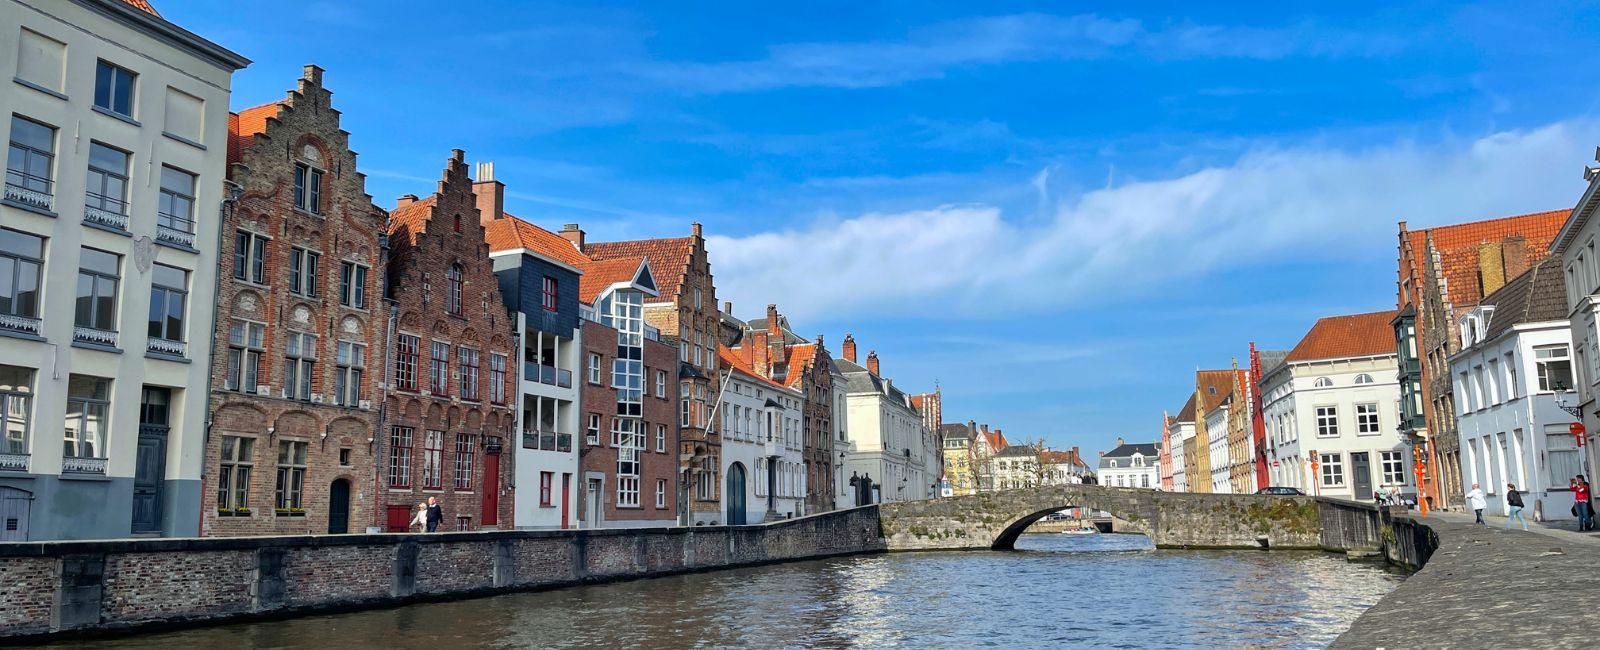 10 of the most romantic cities around the world, Bruges